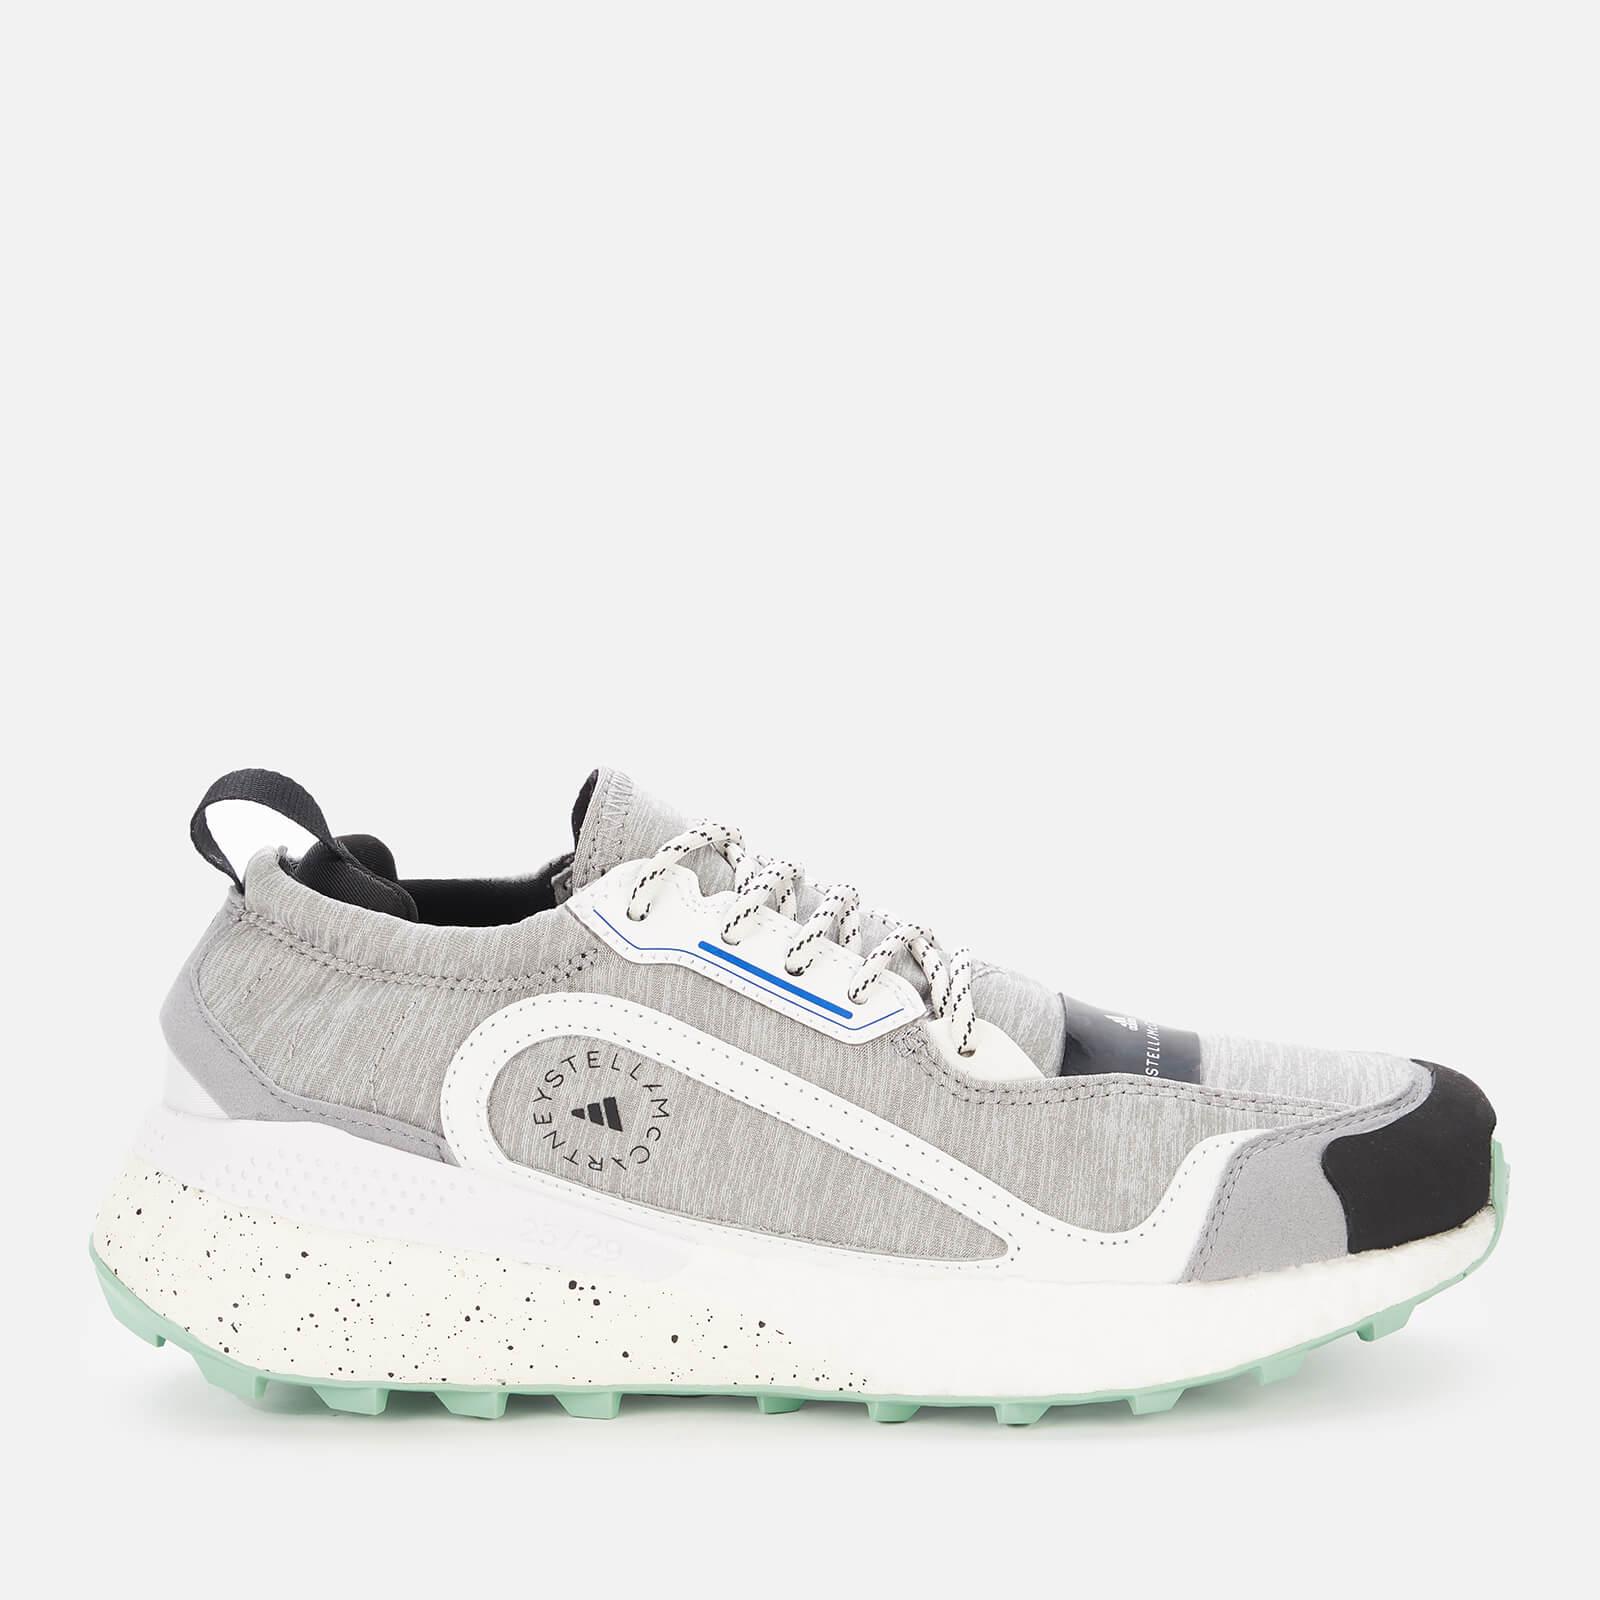 adidas By Stella McCartney Outdoorboost 2.0 Heather Trainers in Gray | Lyst